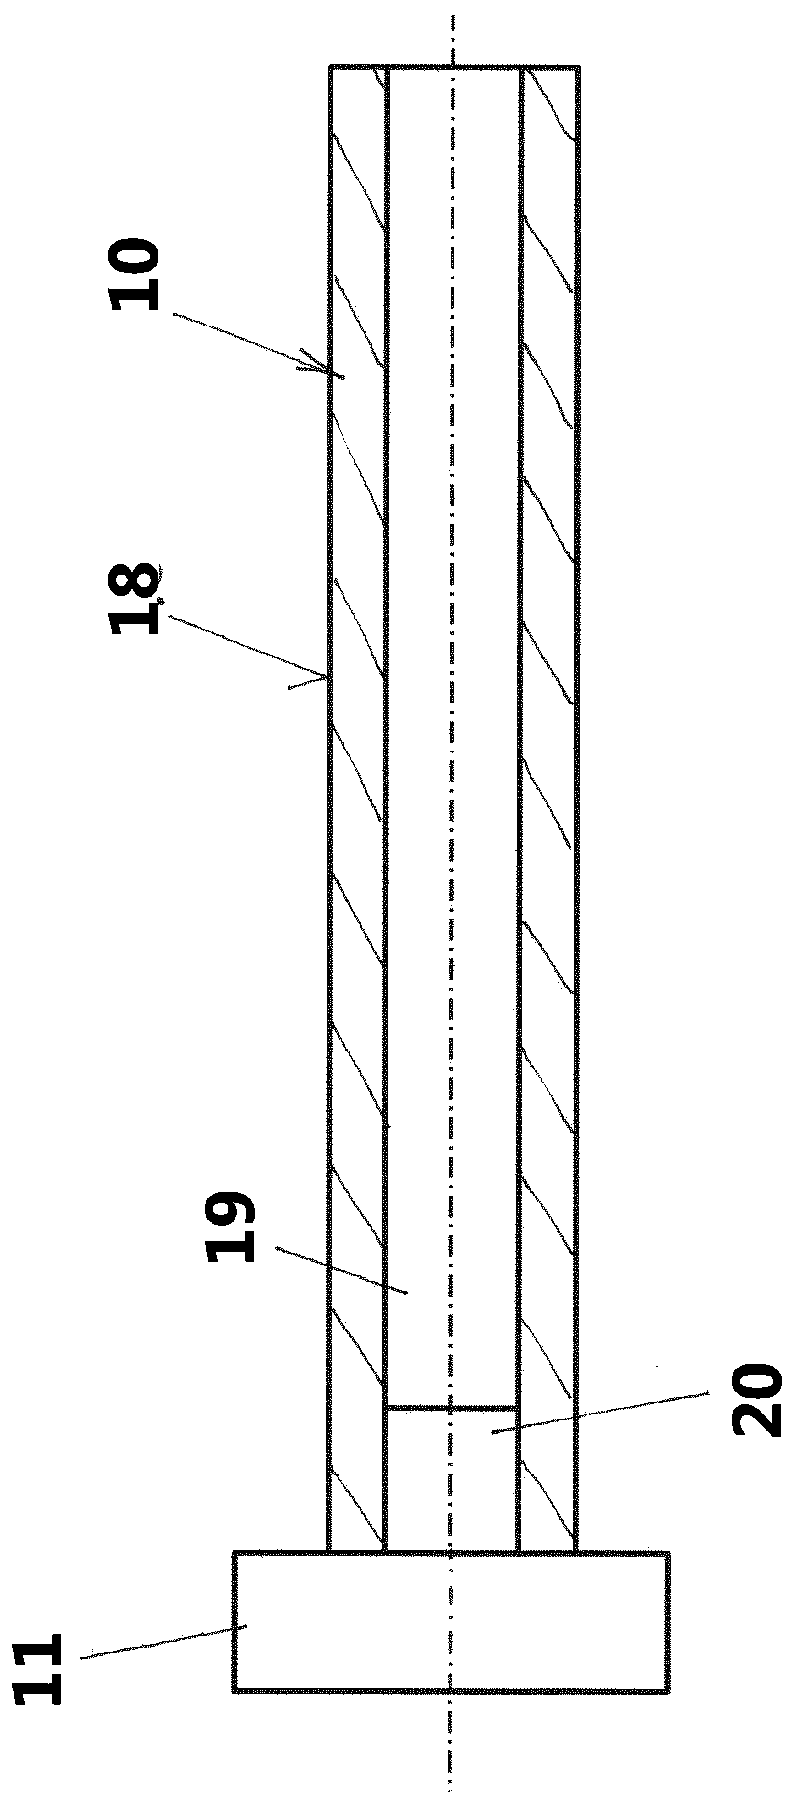 Method for producing camshaft assembly